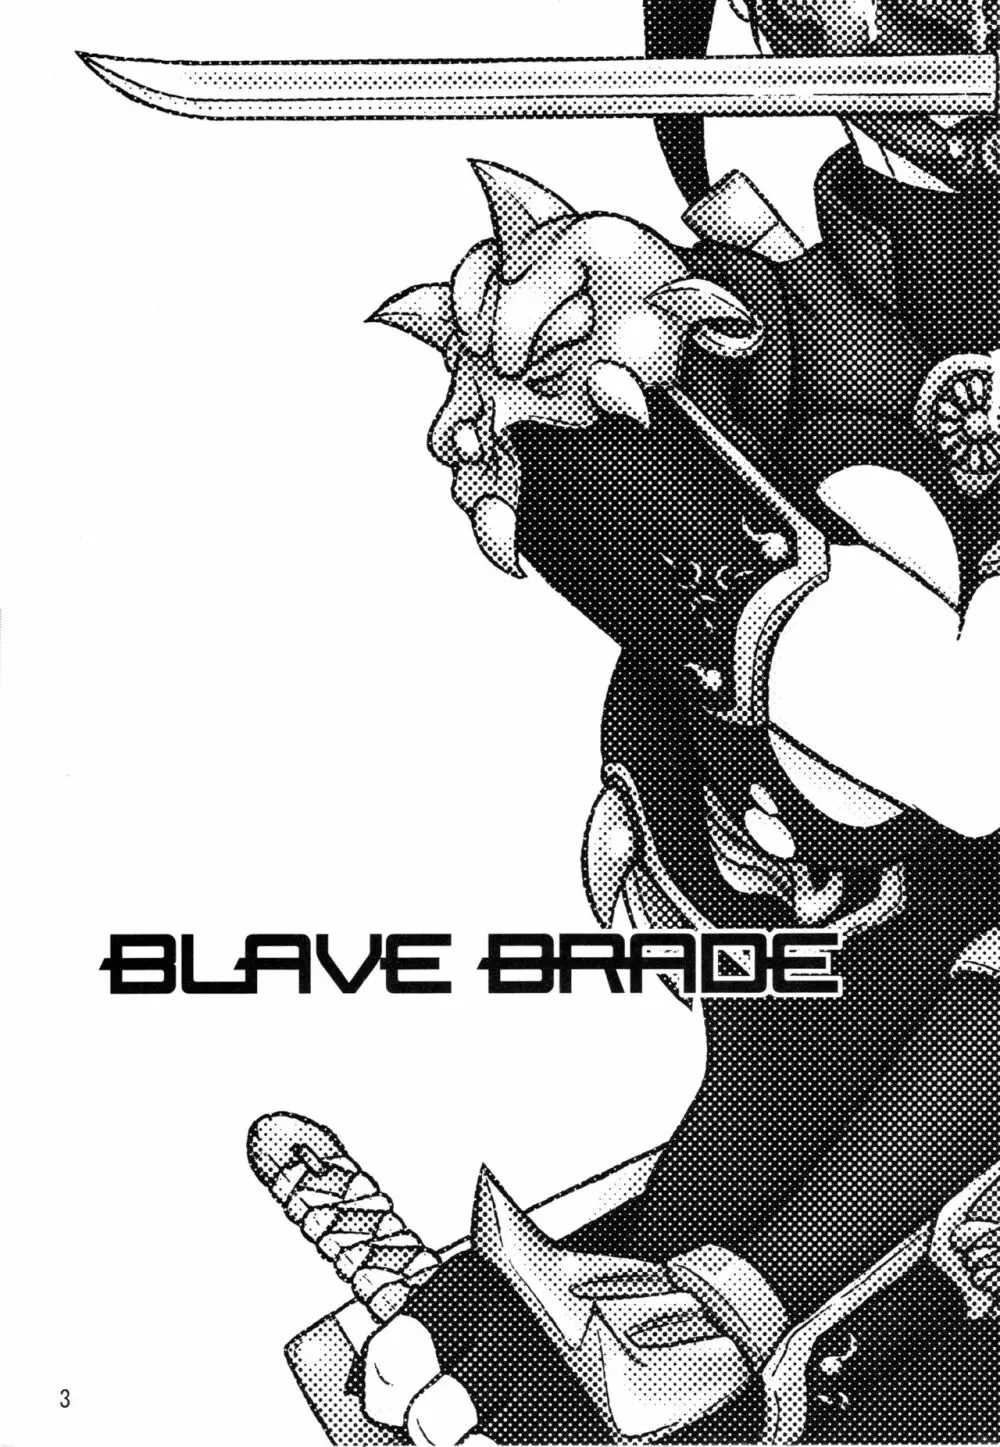 BLADE BRAVE - page2